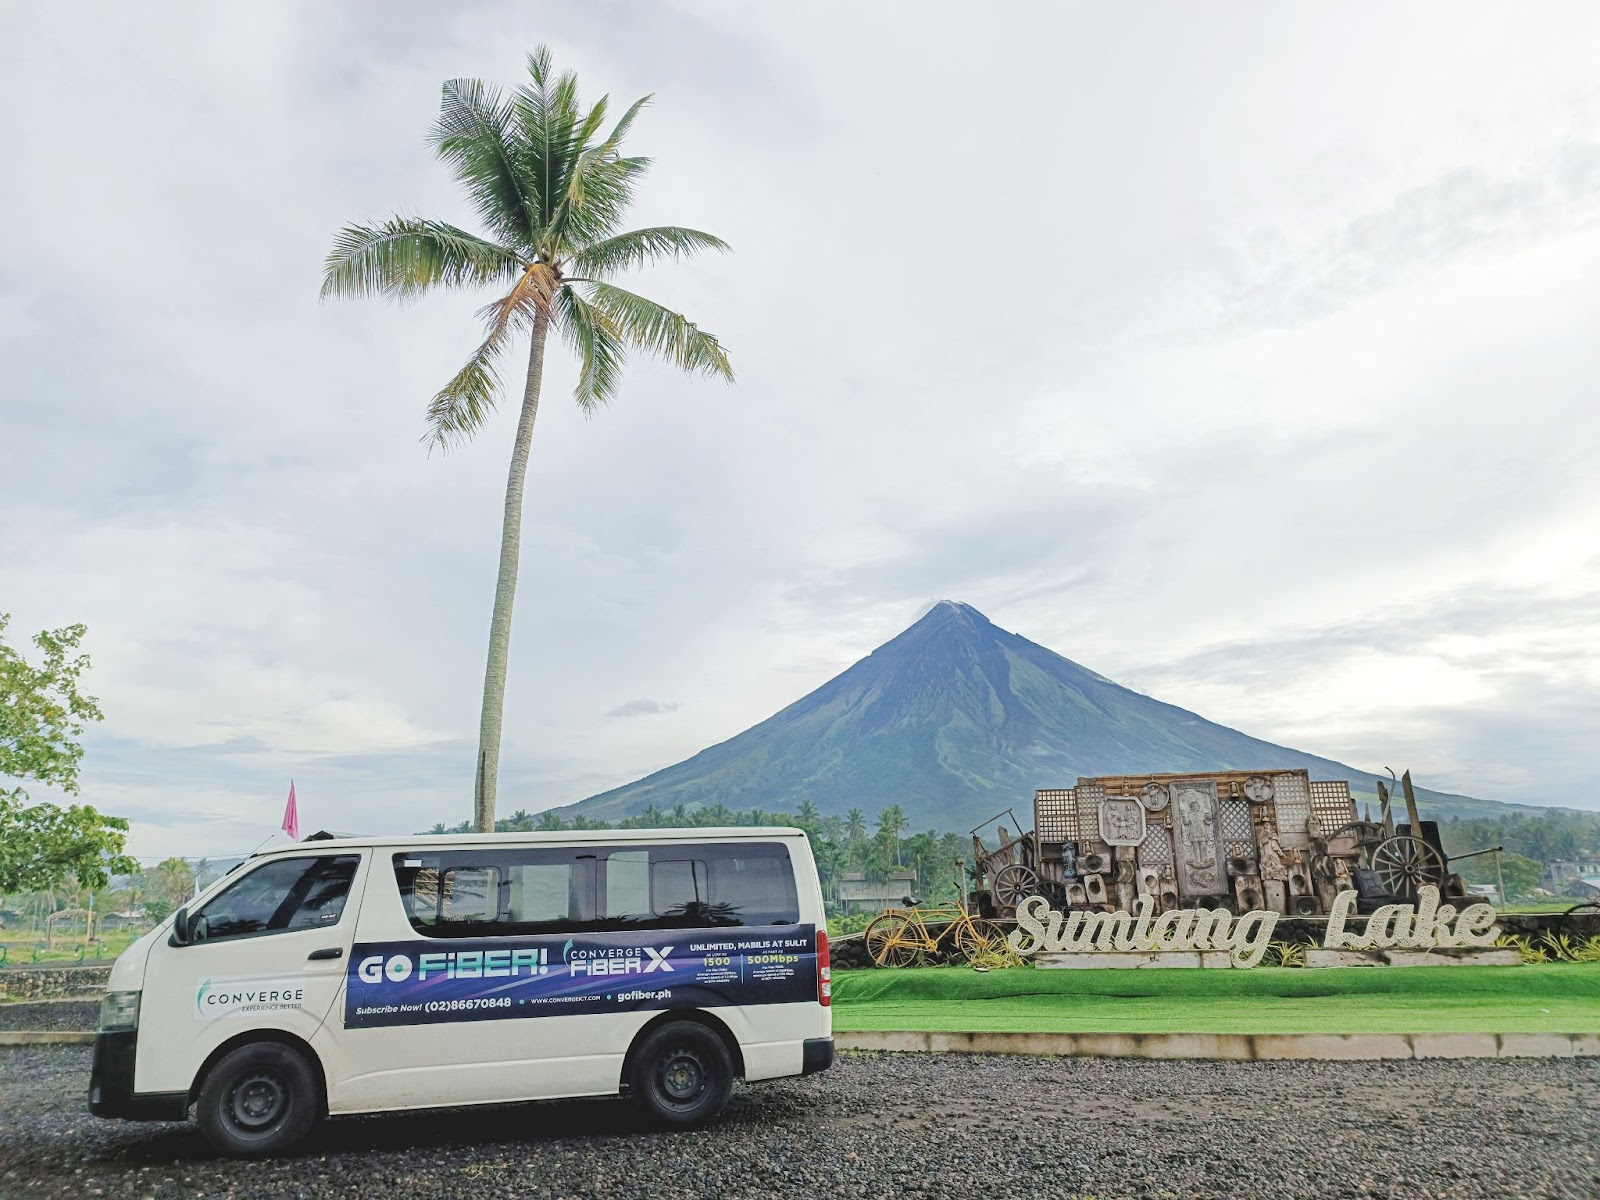 A white van parked next to a palm tree and a mountain Description automatically generated with low confidence